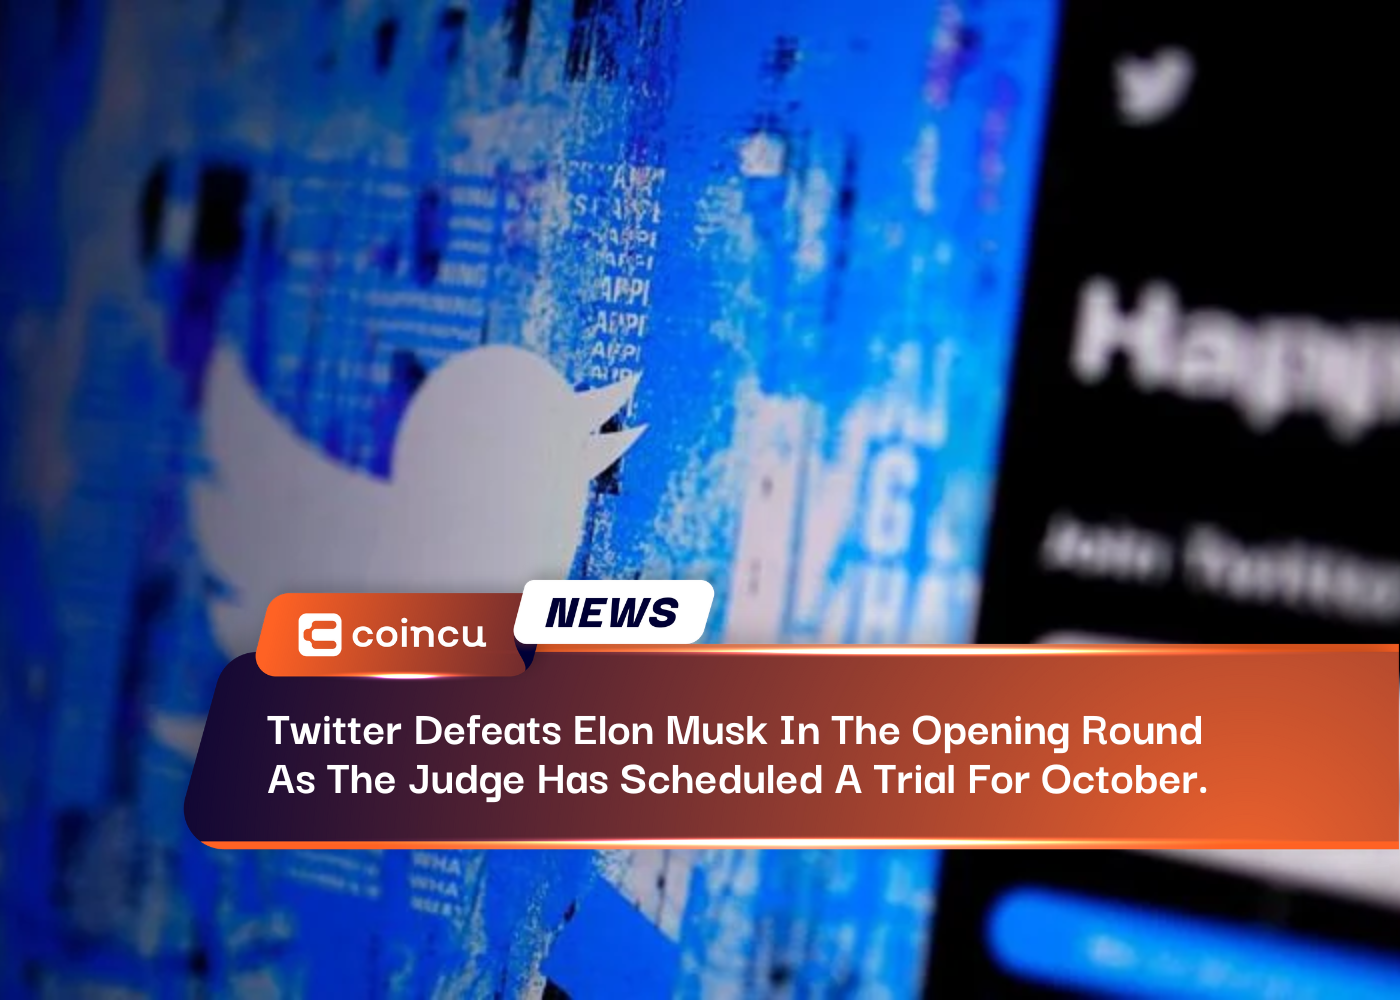 Twitter Defeats Elon Musk In The Opening Round As The Judge Has Scheduled A Trial For October.